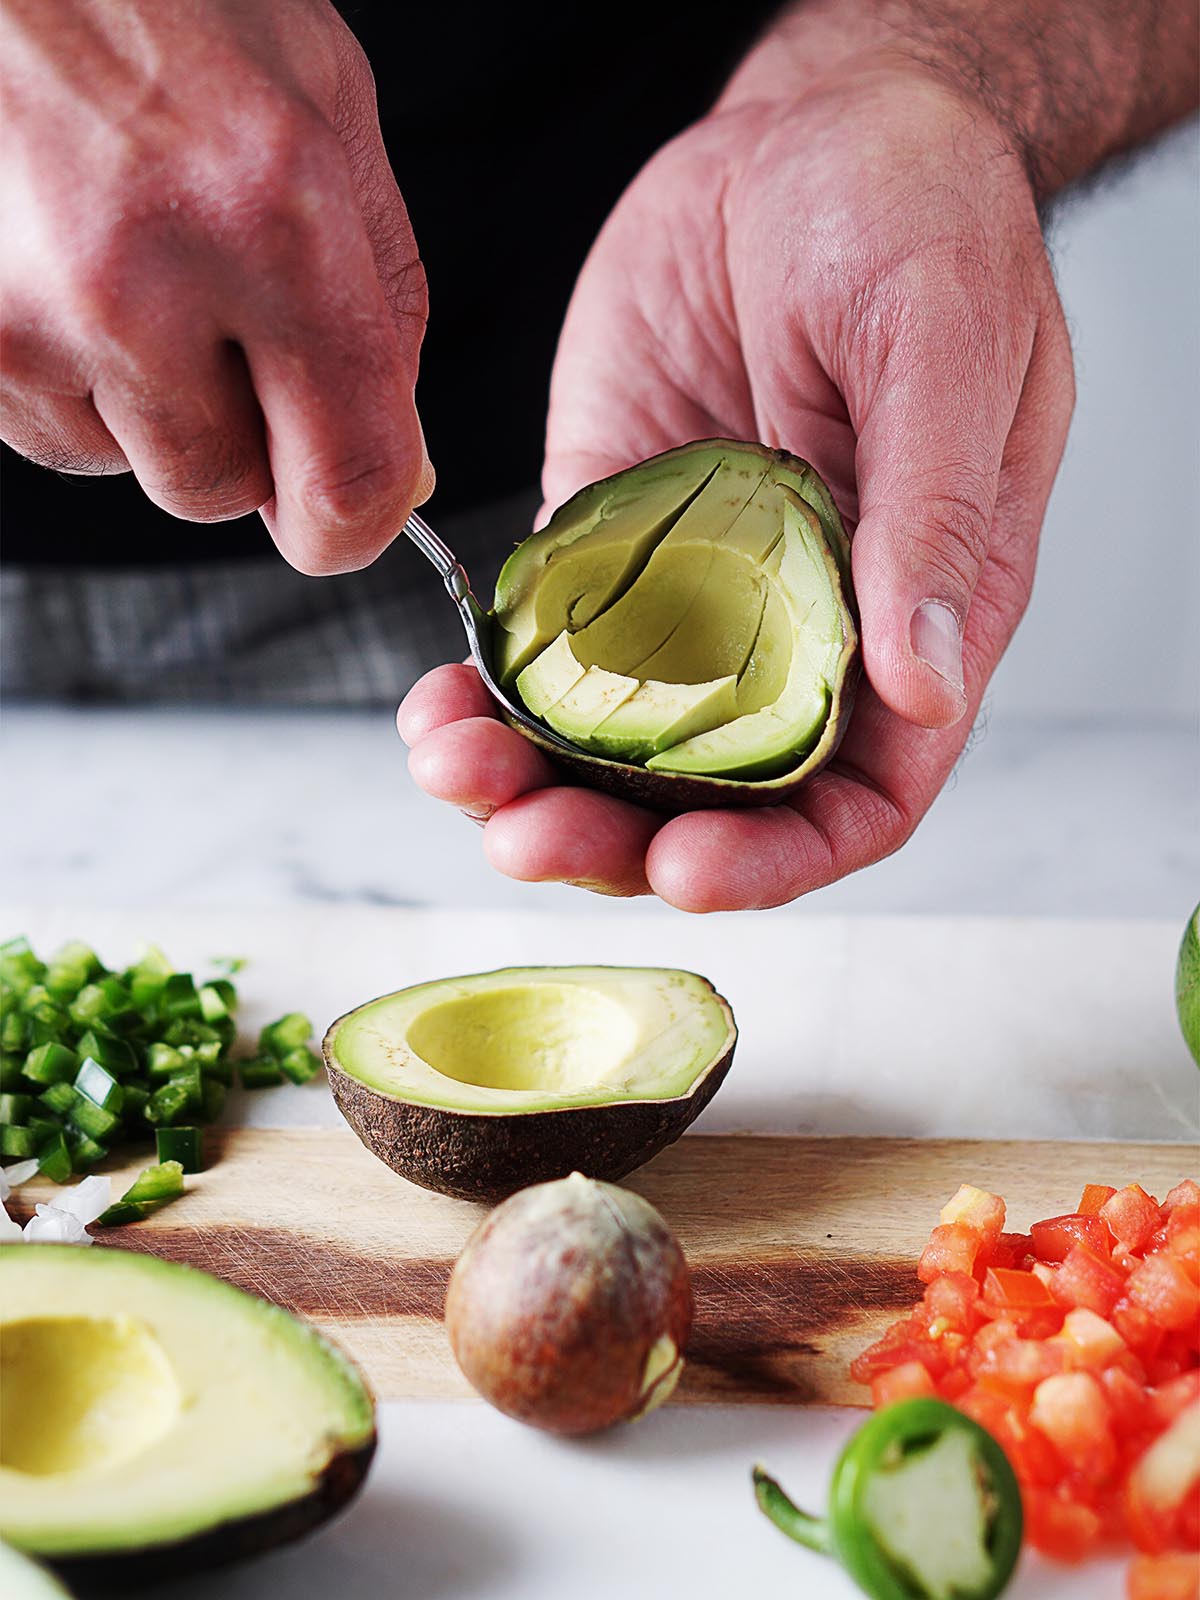 Two hands cutting an avocado.